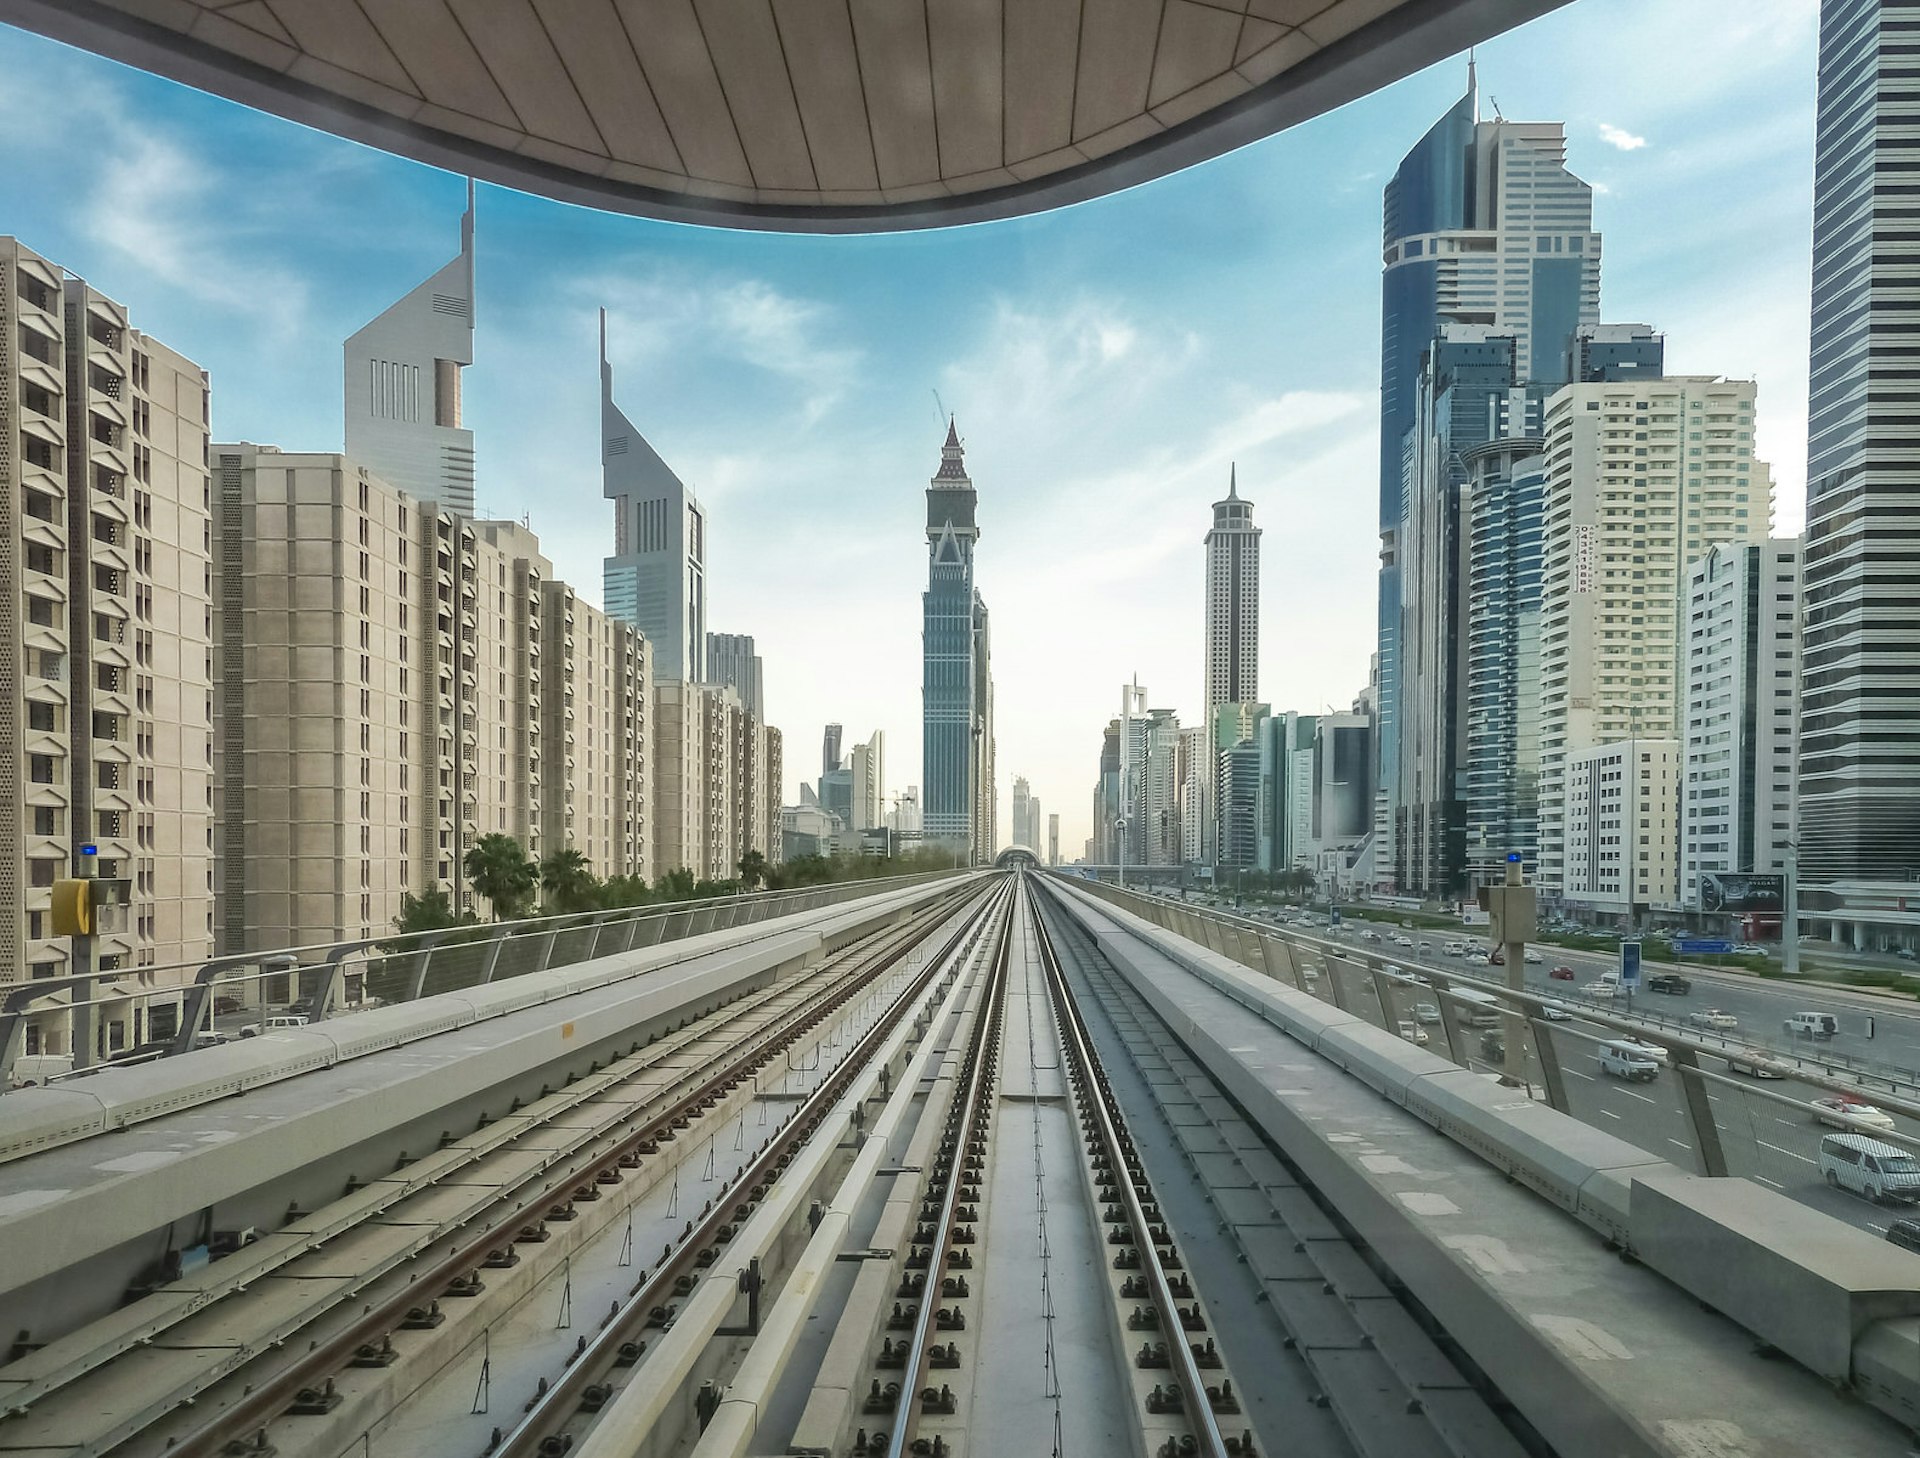 Dubai Metro. Image by Sir Francis Canker Photography / Getty